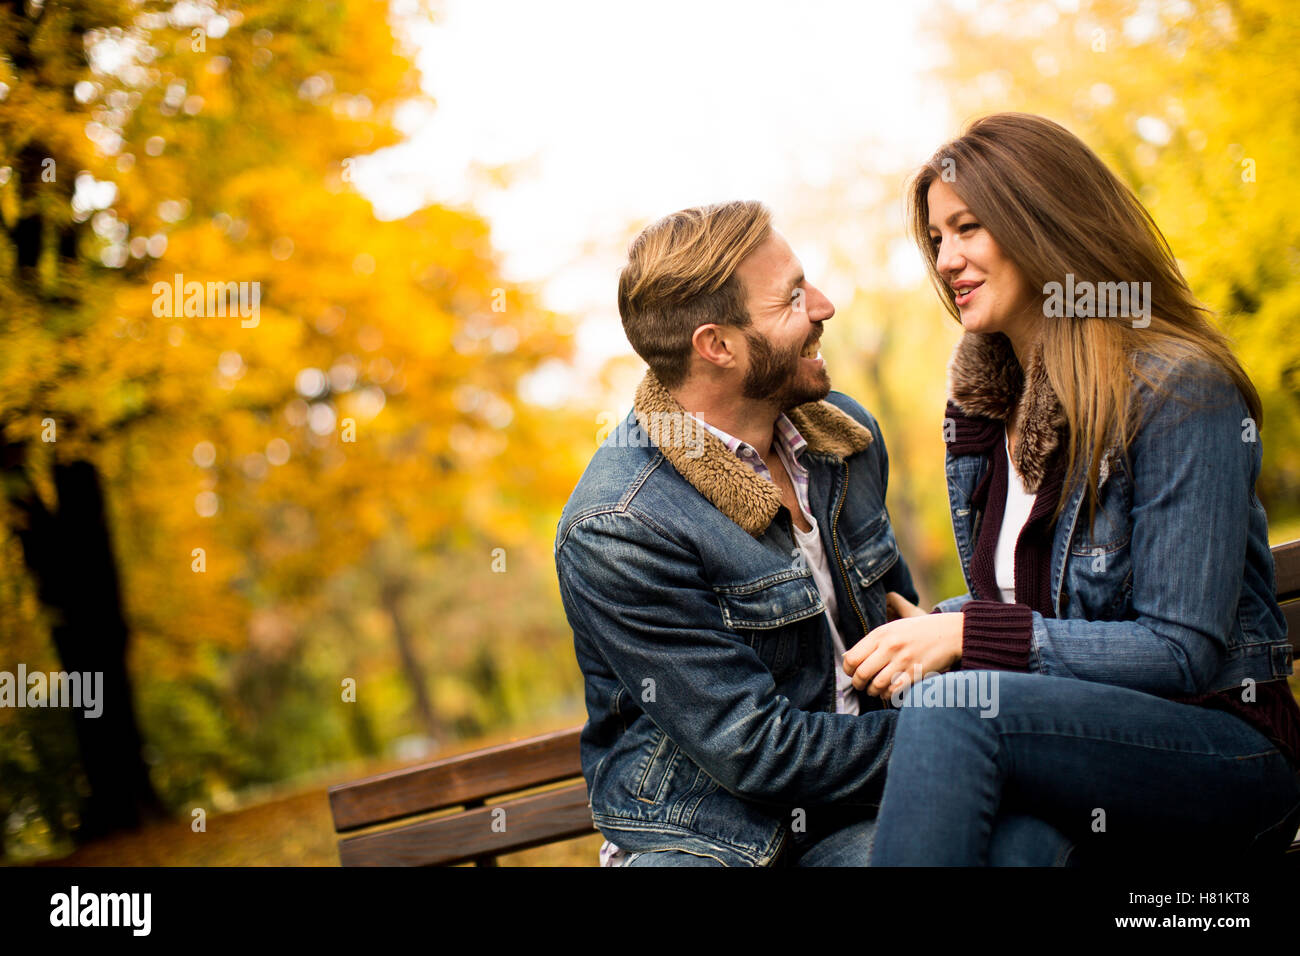 Loving and romantic couple on a bench in the autumn park Stock Photo